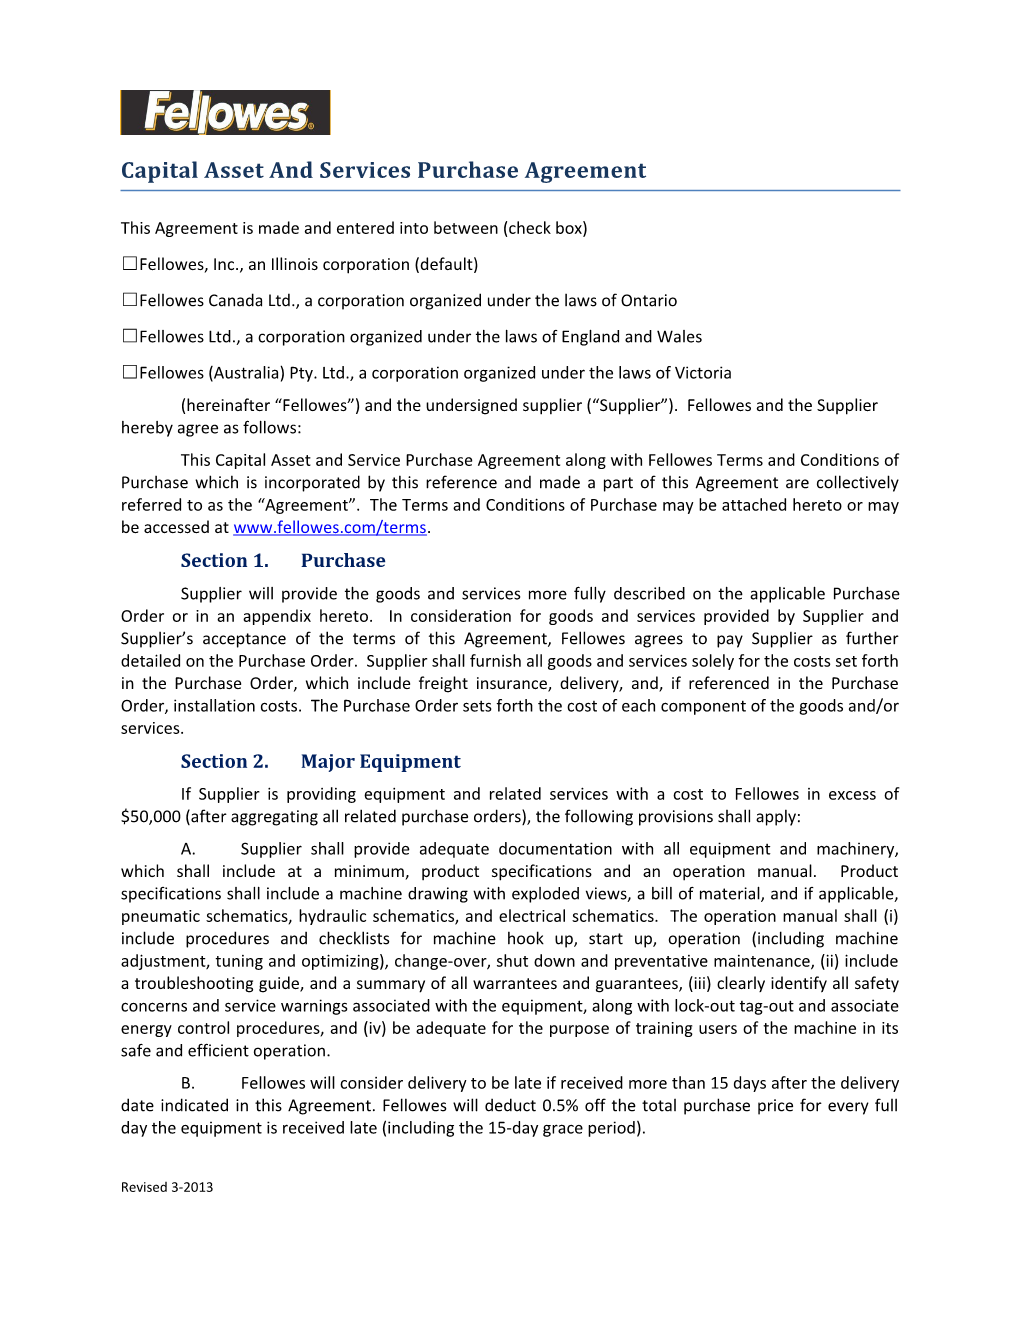 Fellowes Capital Asset and Services Purchase Agreement